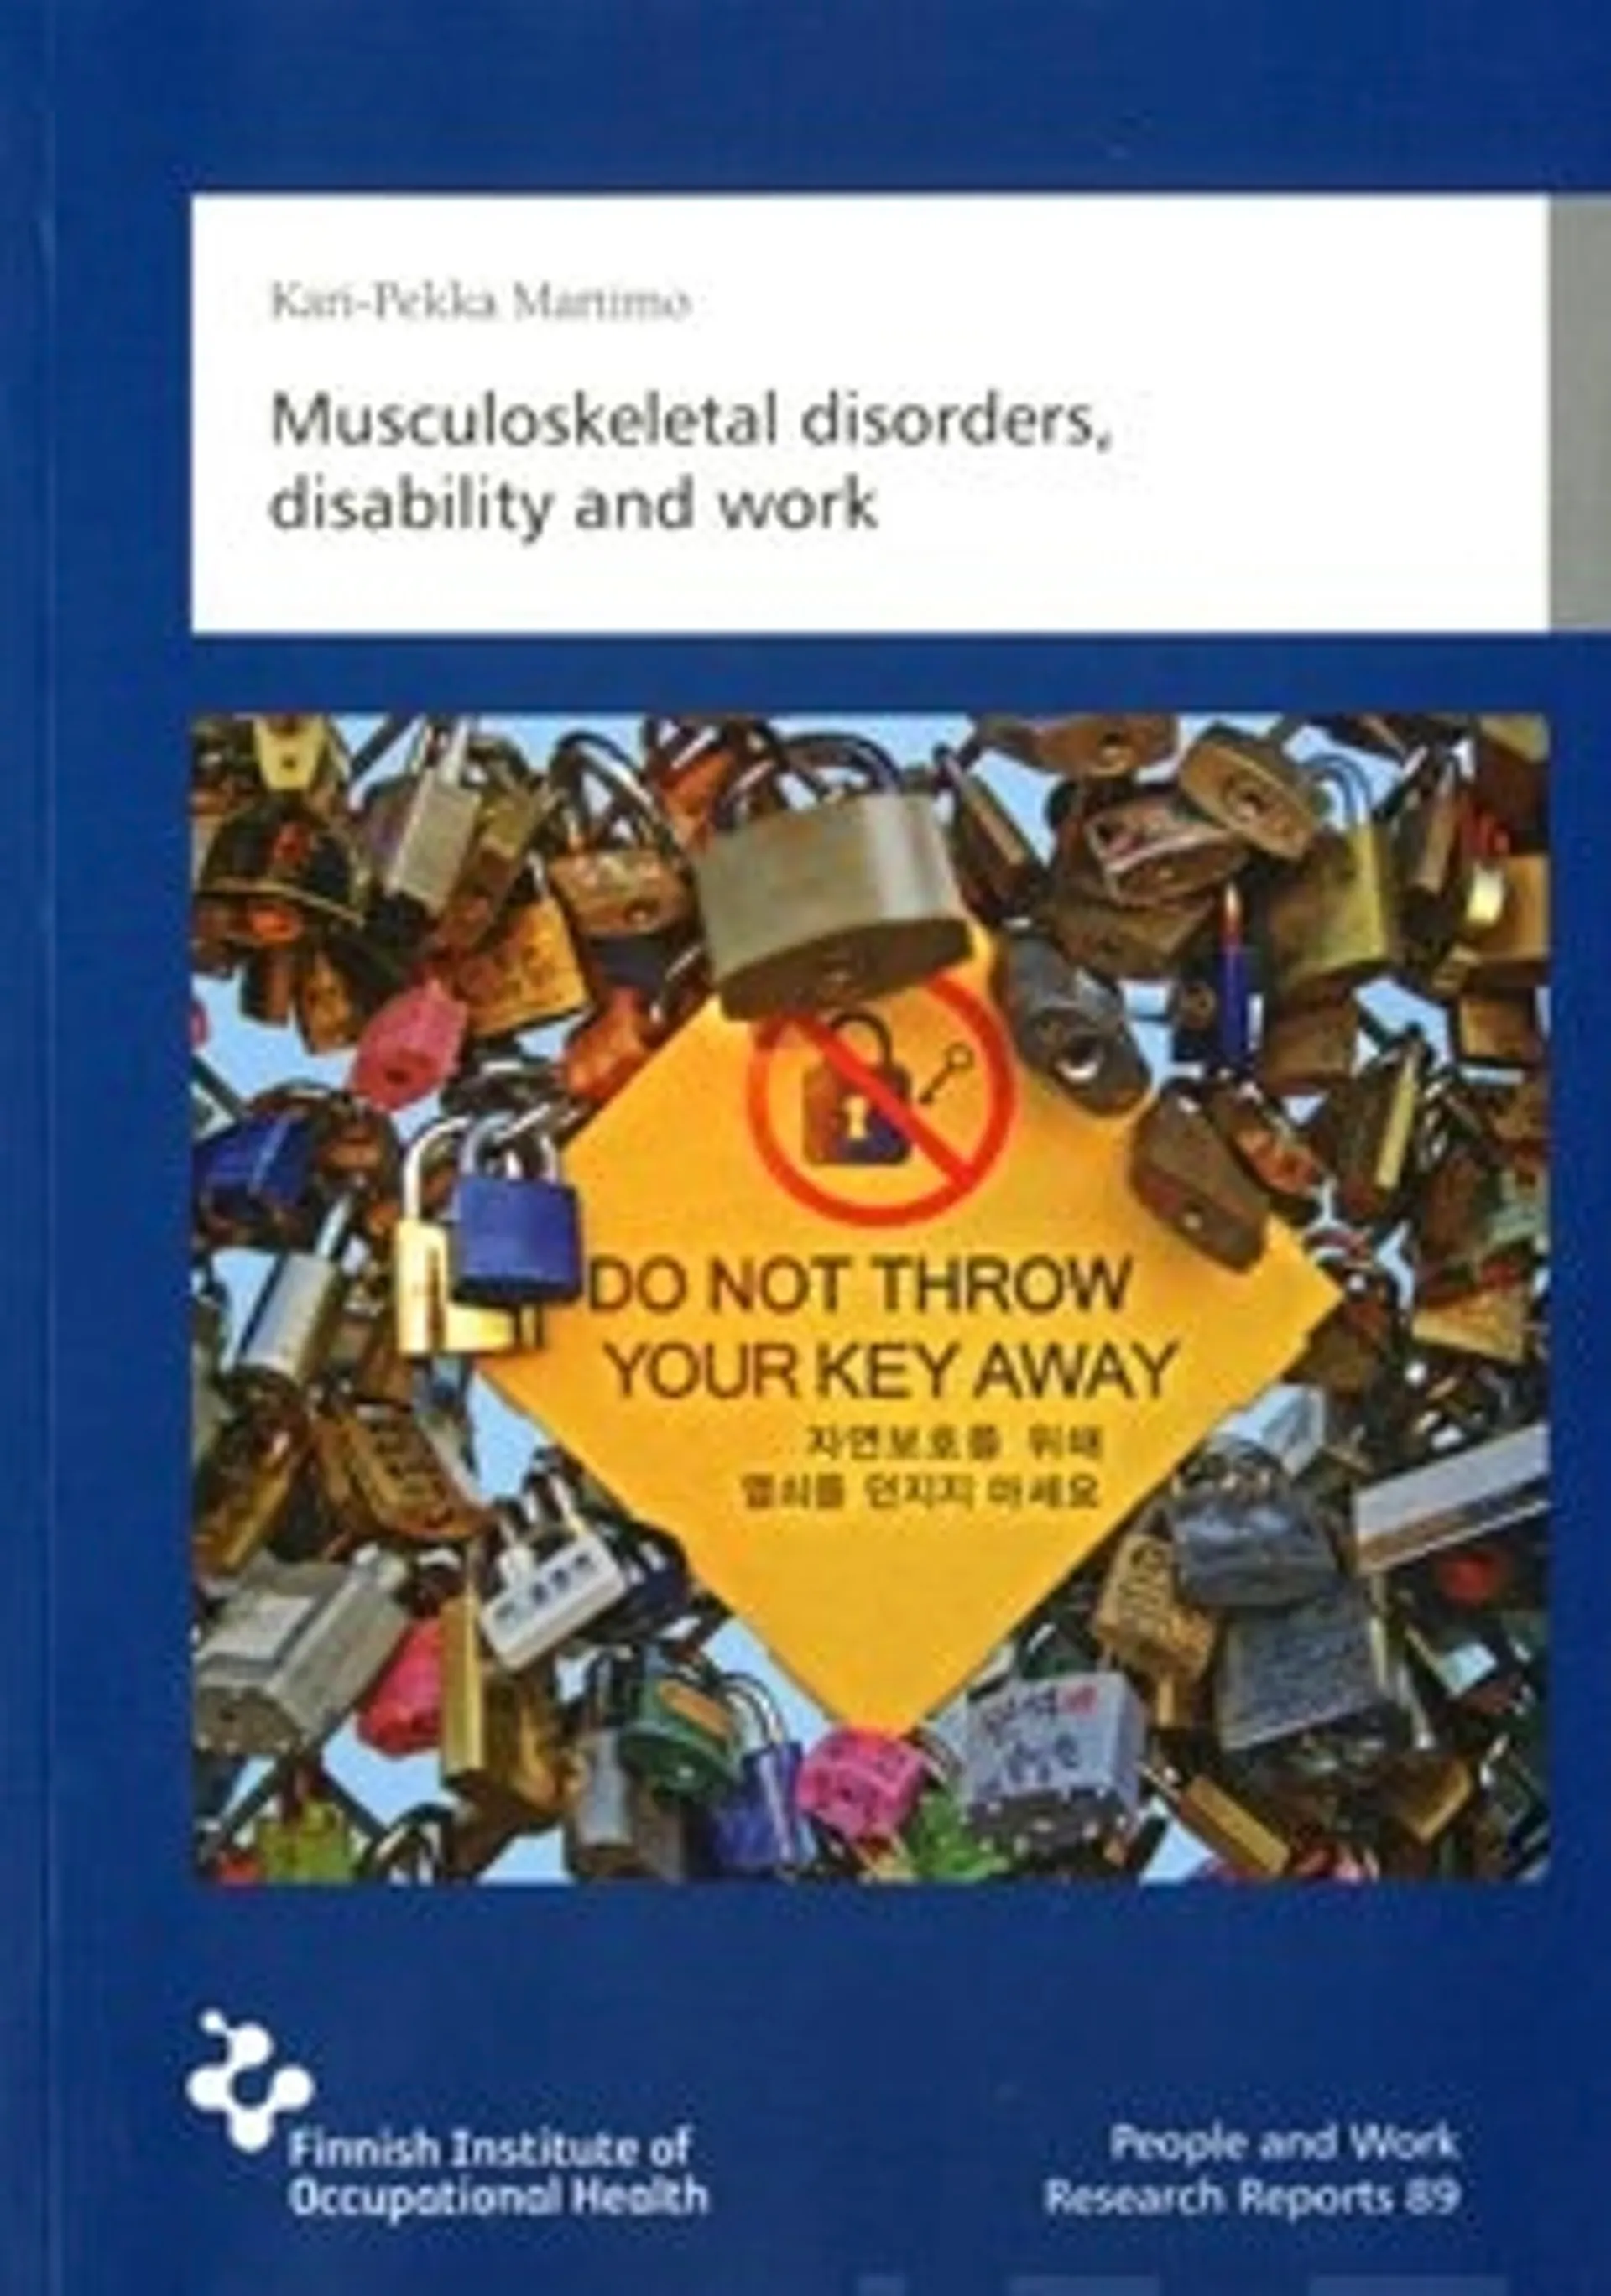 Musculoskeletal disorders, disability and work